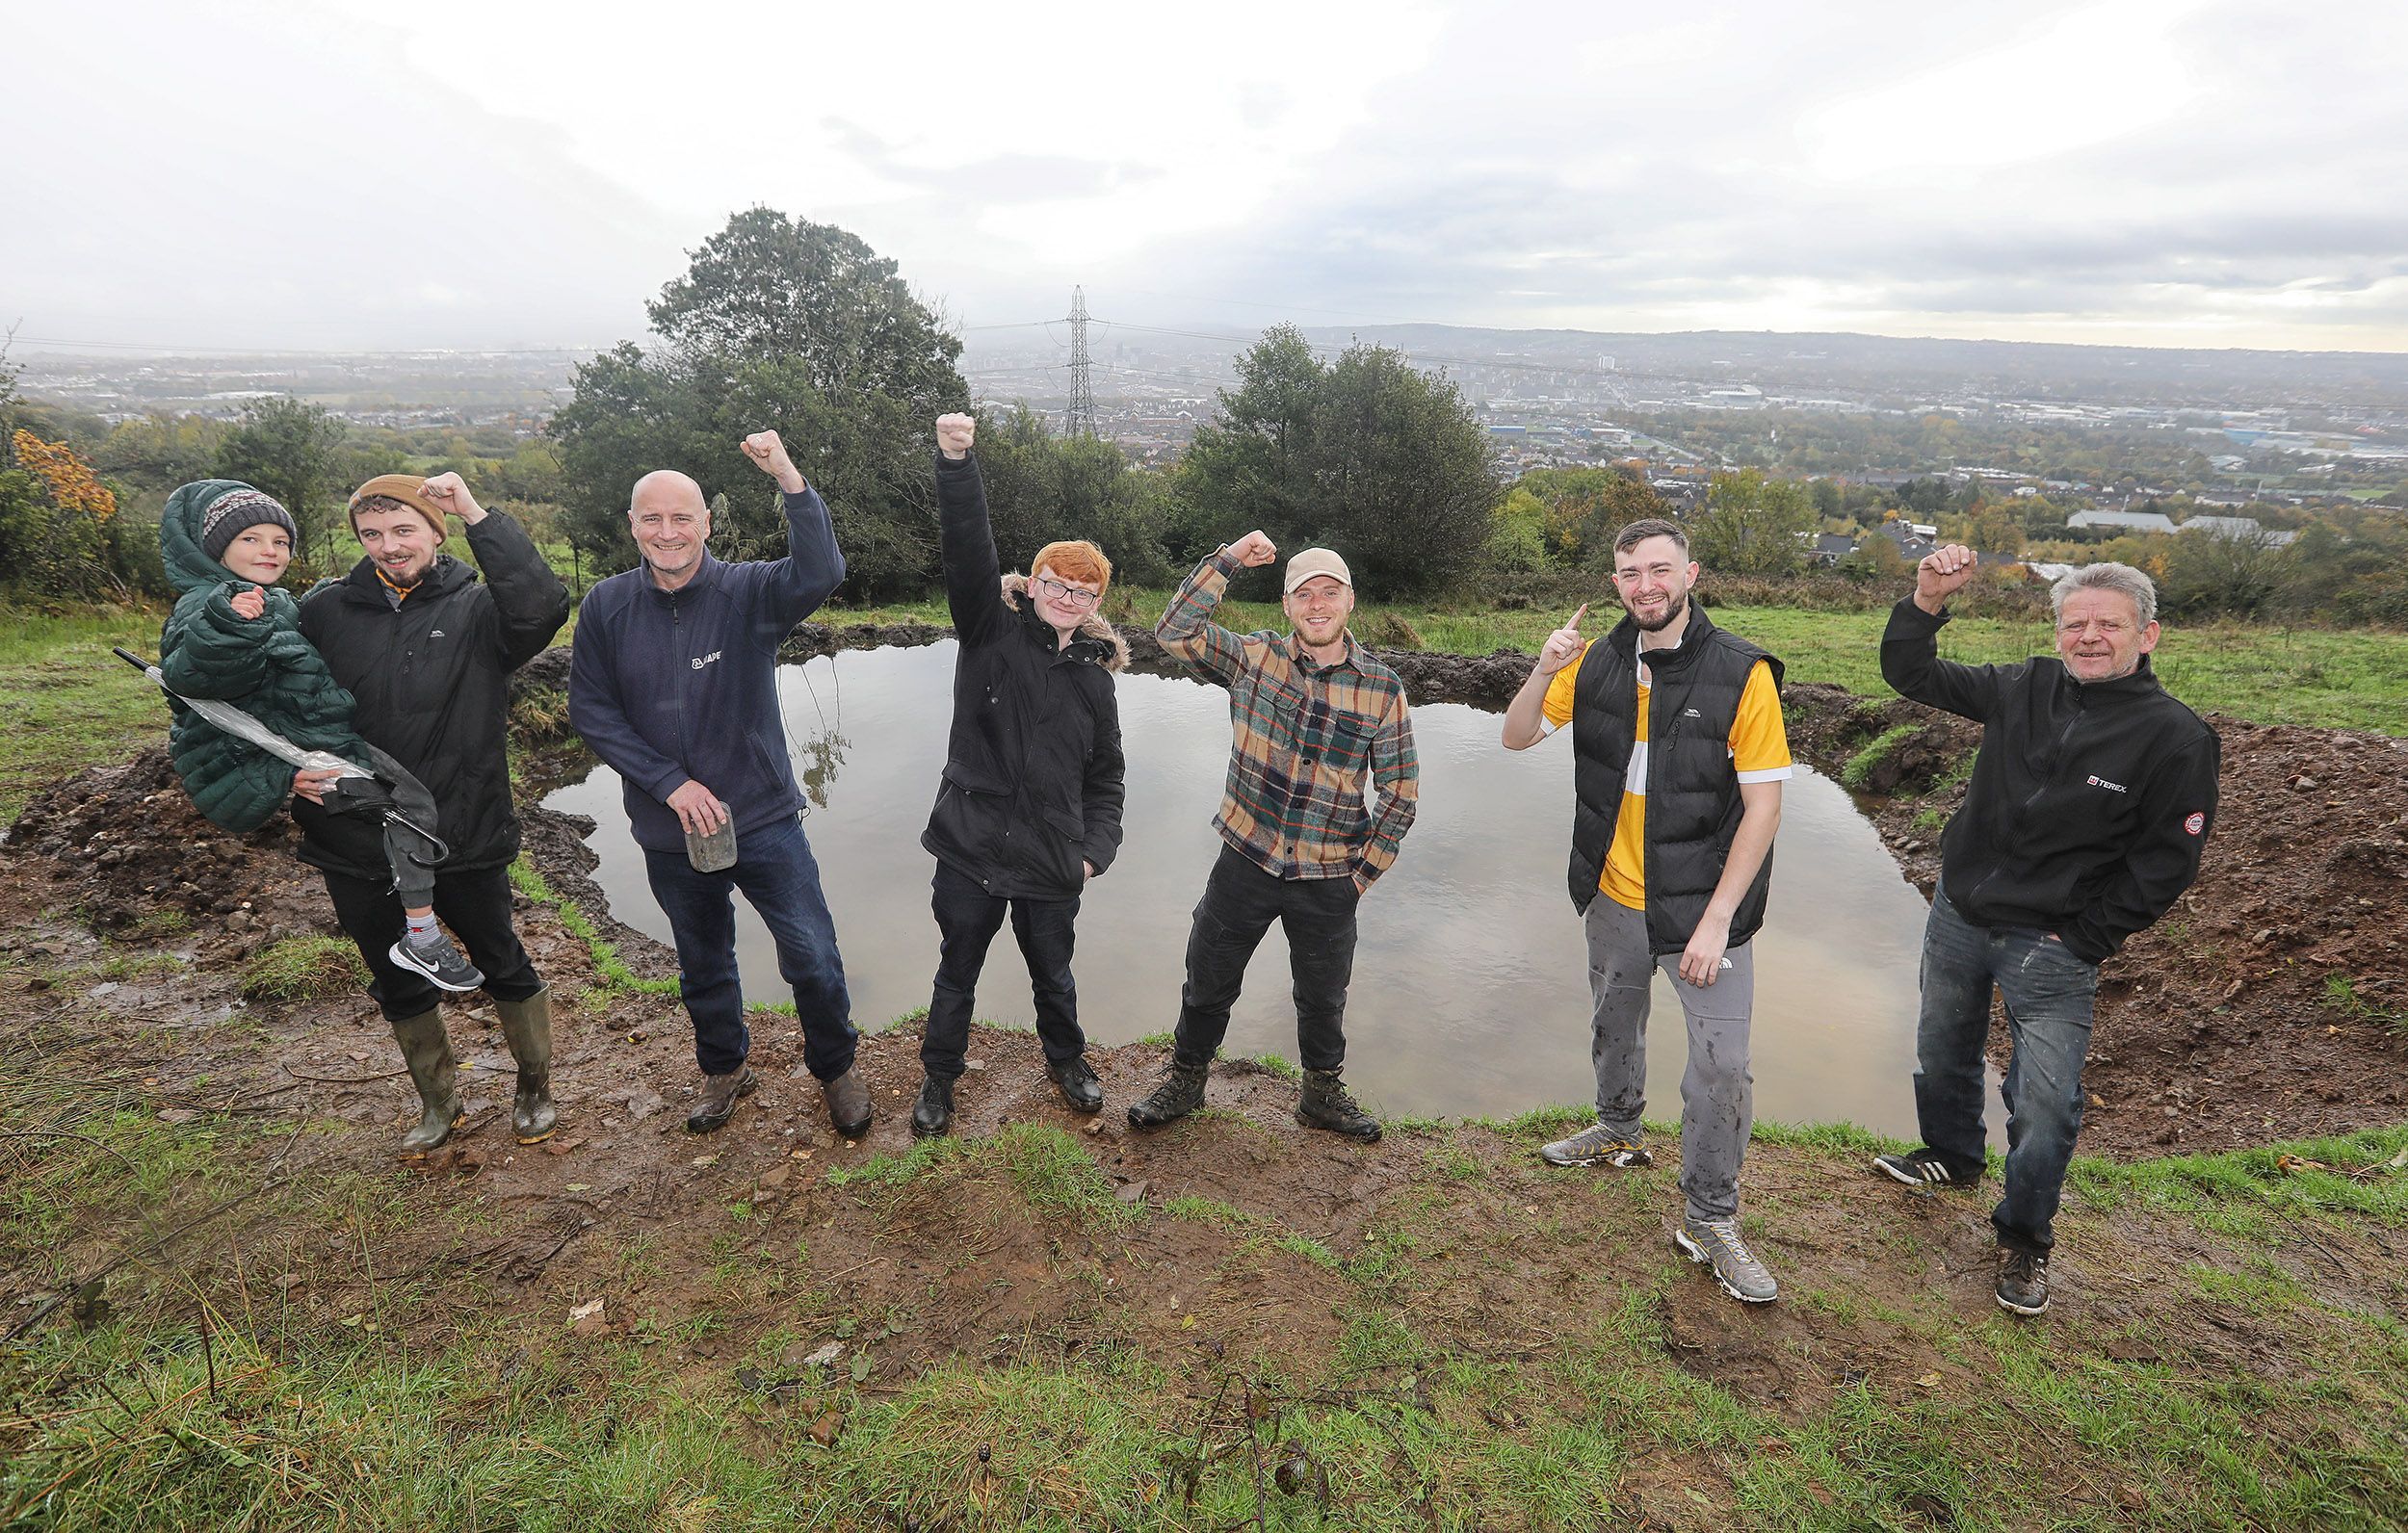 FOR LOVE OF NATURE: Volunteers help award-winning nature activist Aaron Kelly dig out a wildlife pool on Divis Mountain this year